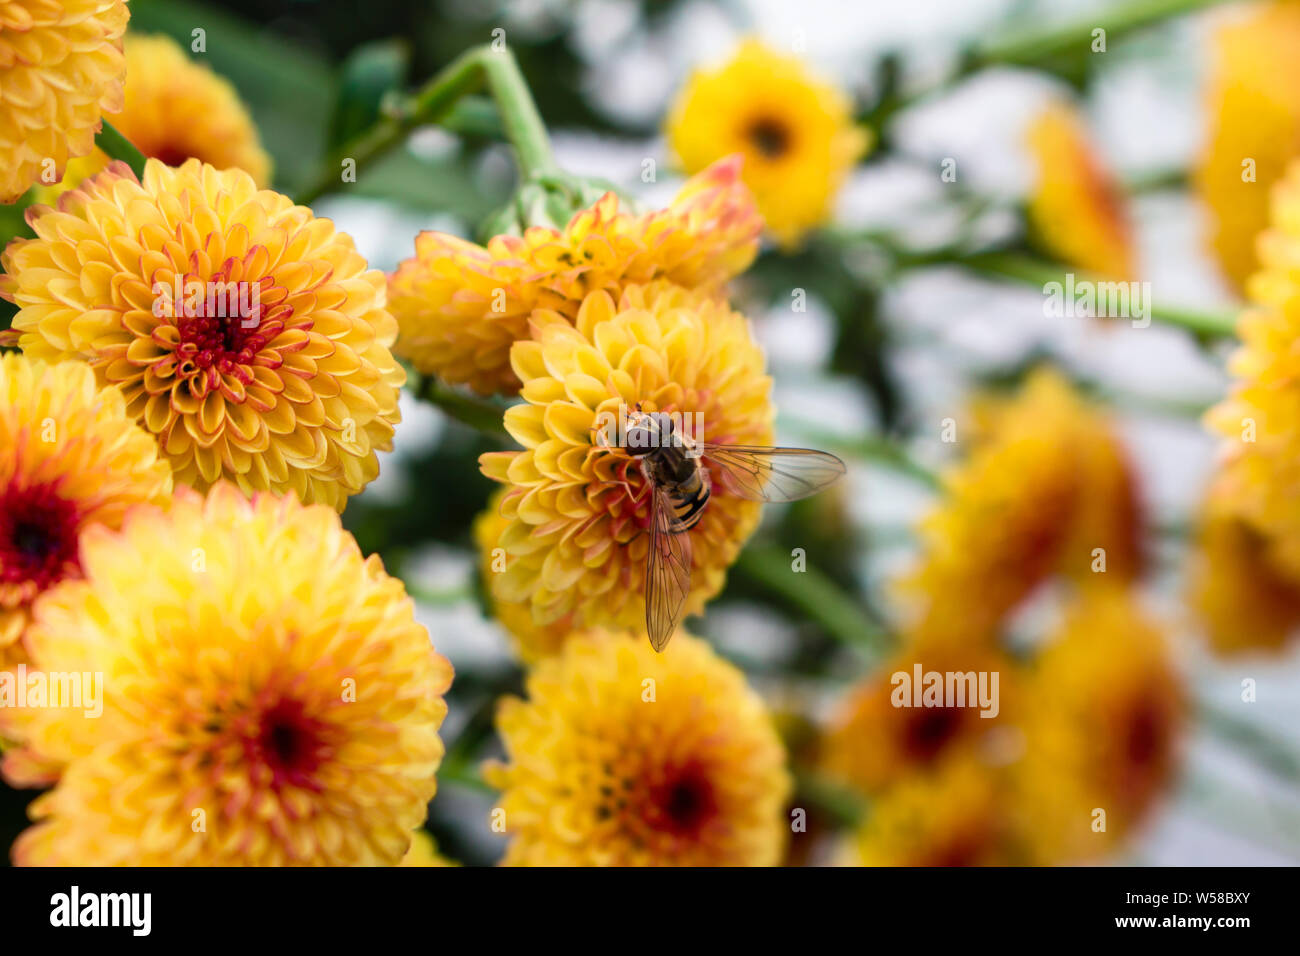 Single hoverfly on a flower in a field of Lollipop Yellow Chrysanthemum flowers in full bloom. Blurry background. Stock Photo